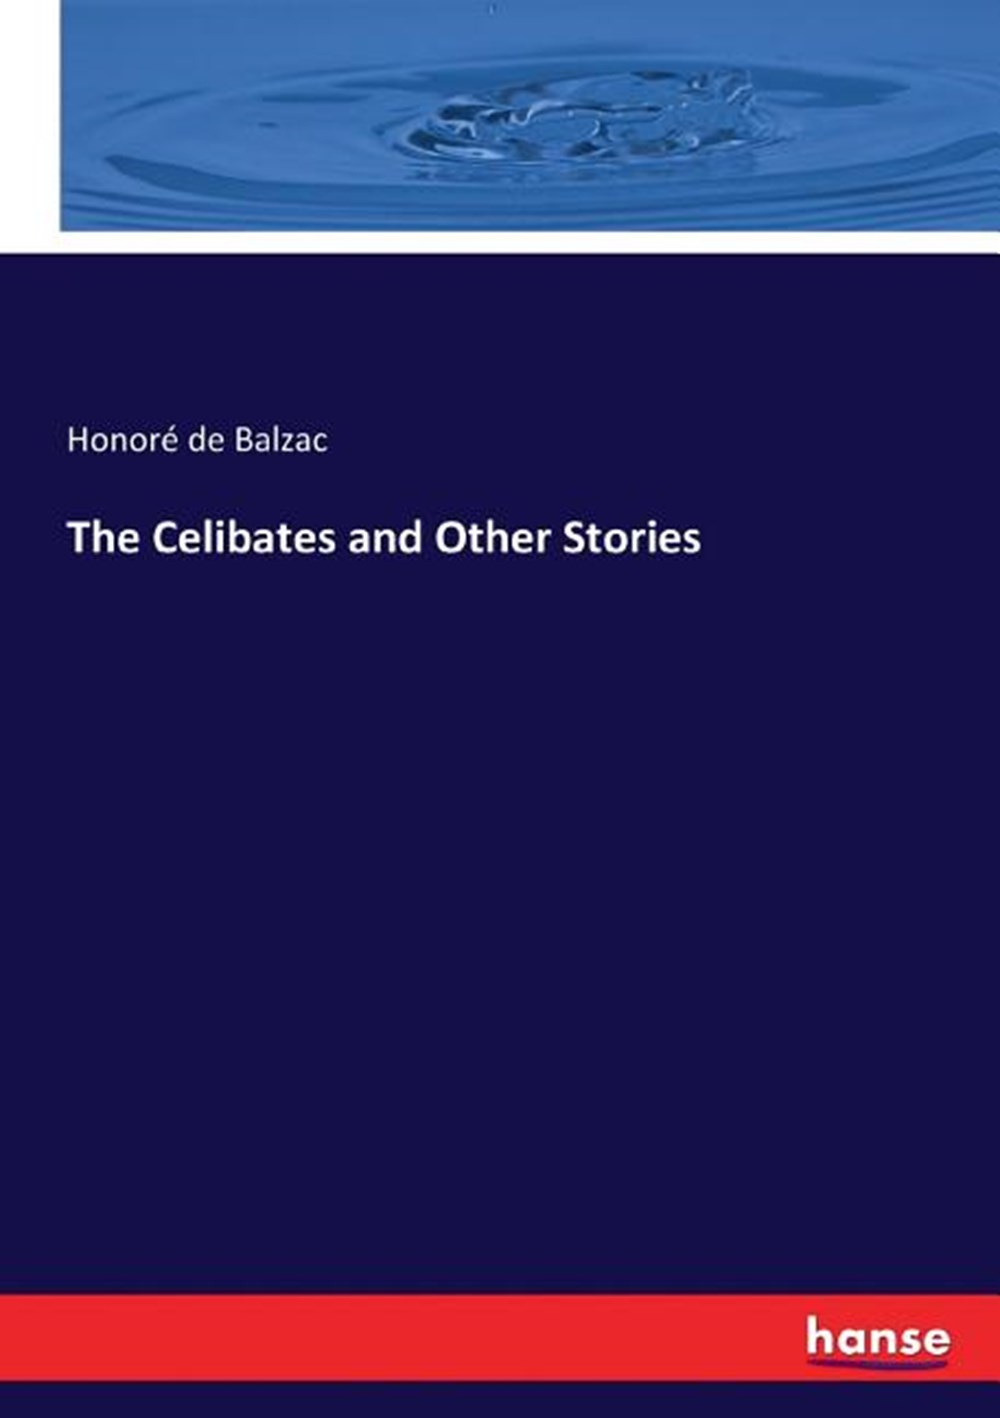 Celibates and Other Stories